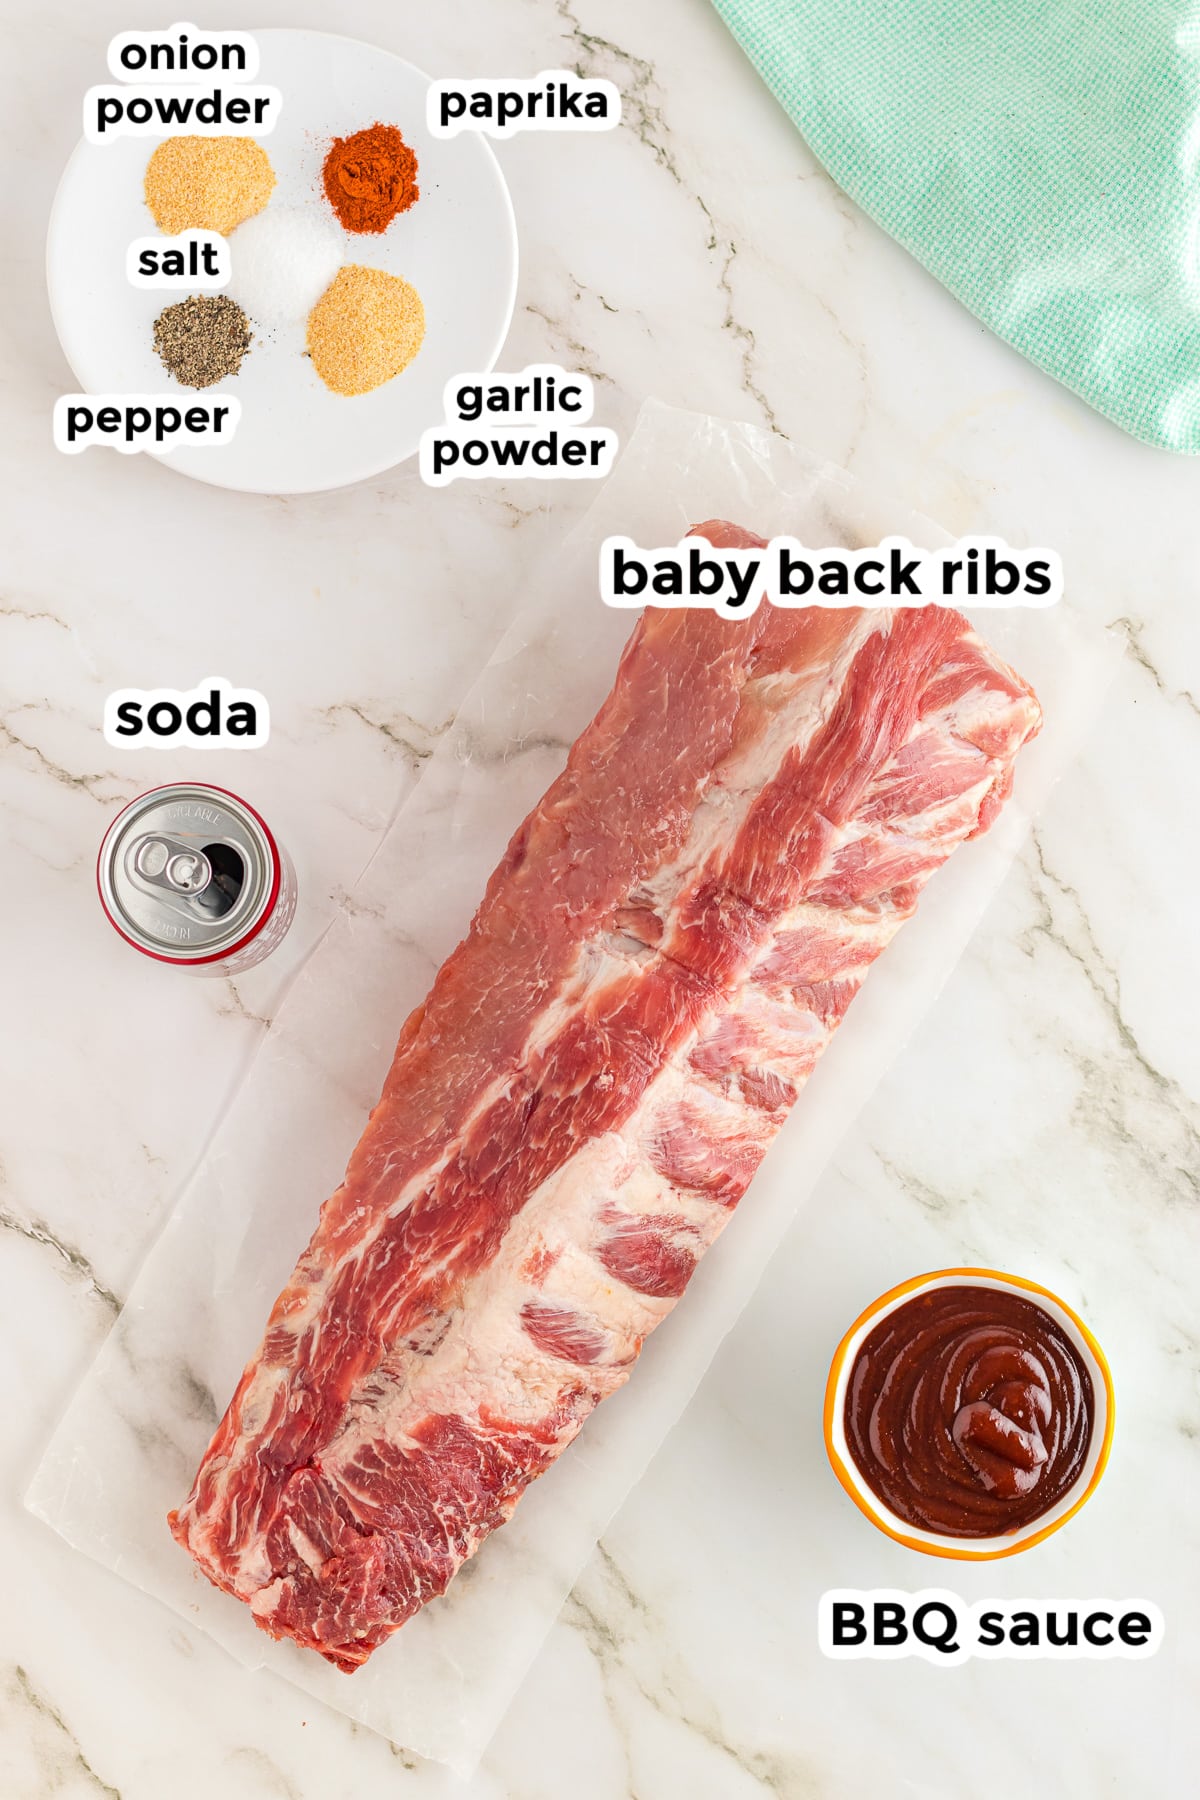 Ingredients for Dr. Pepper baby back ribs on a counter in bowls with text labels from above.